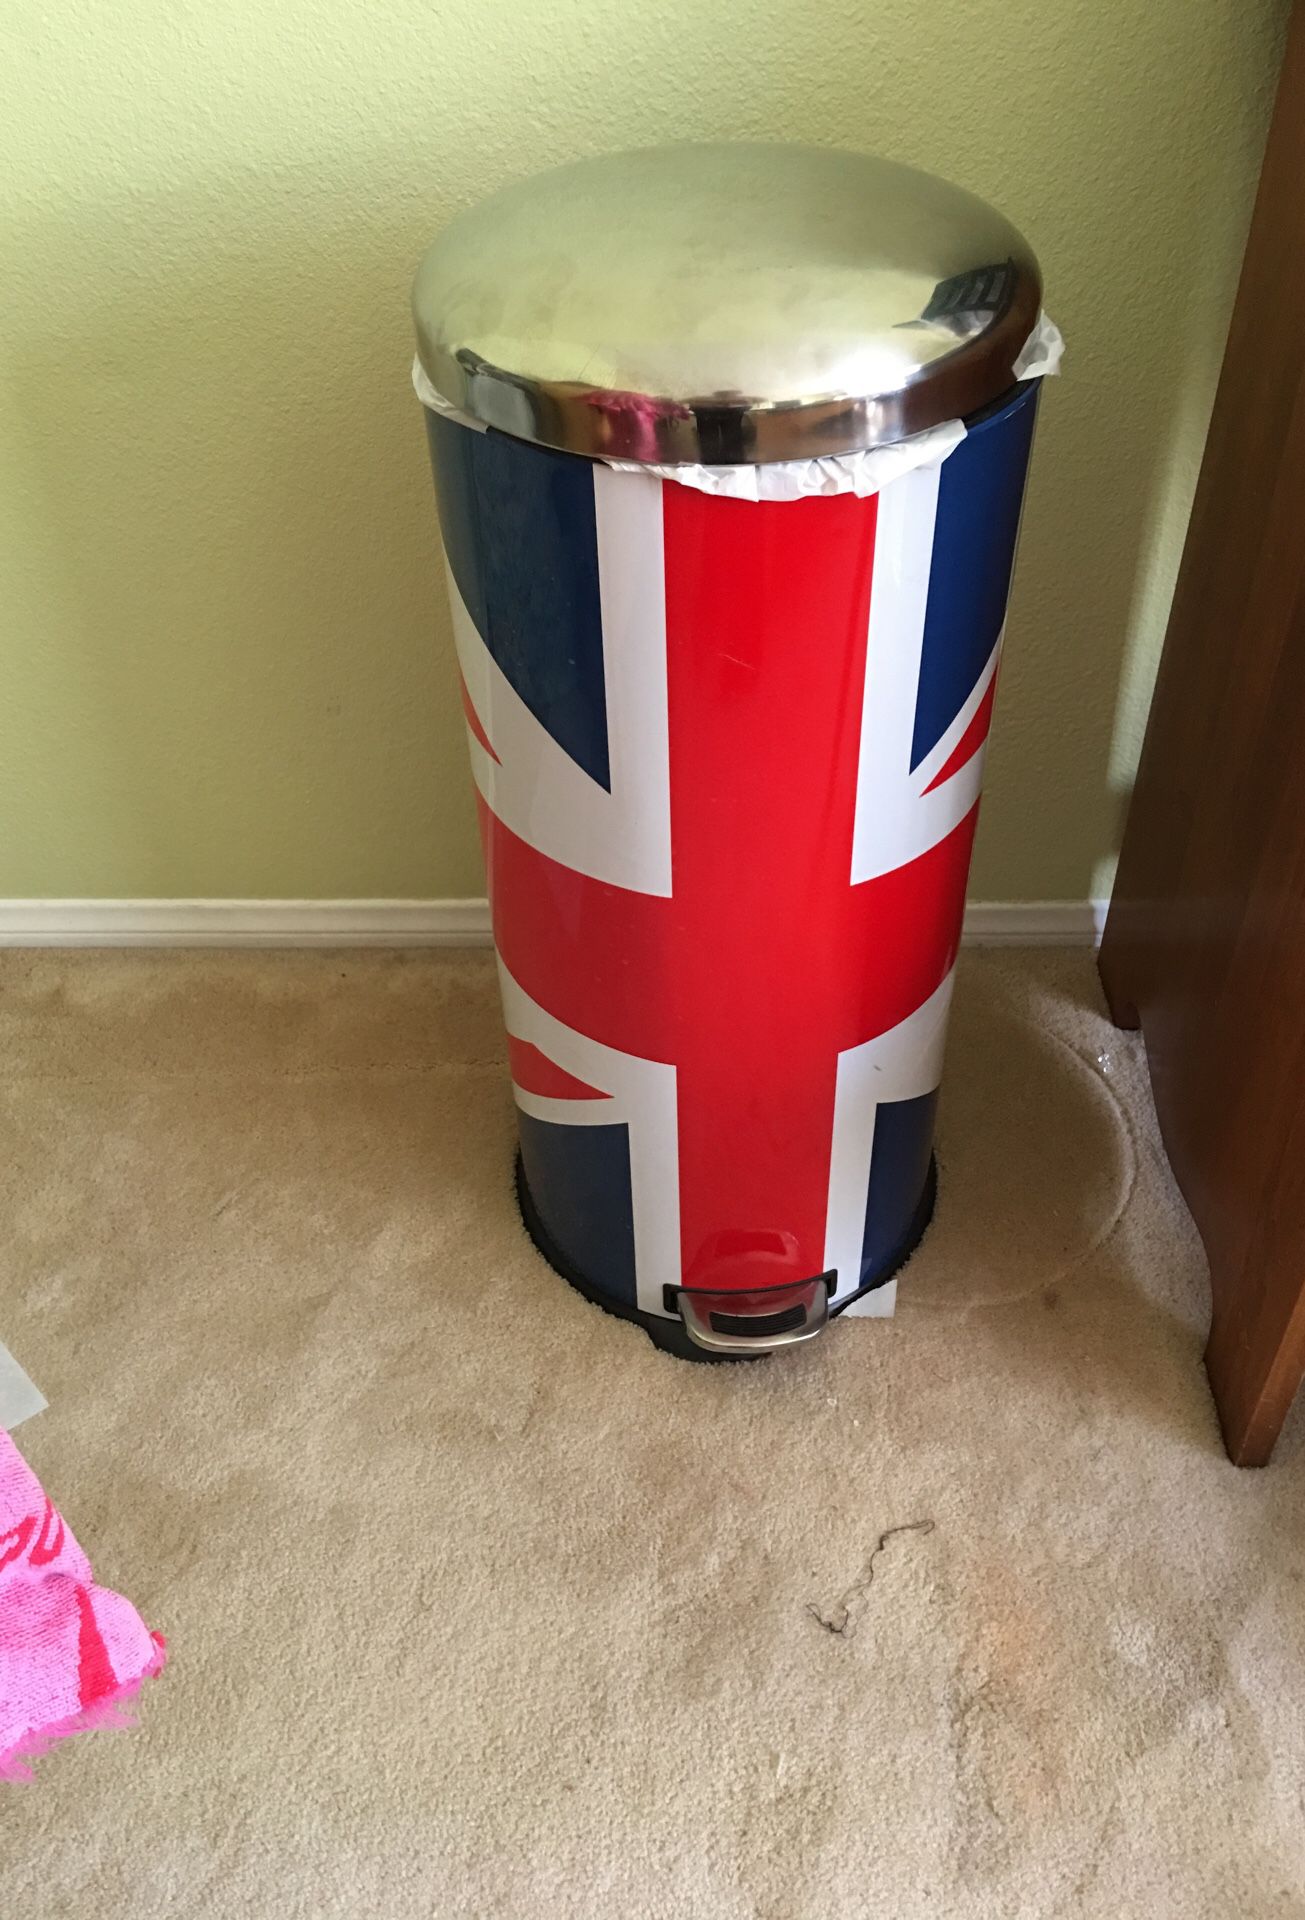 Hot Pink Metal Step to Open Trash Can Girls Room for Sale in San Dimas, CA  - OfferUp